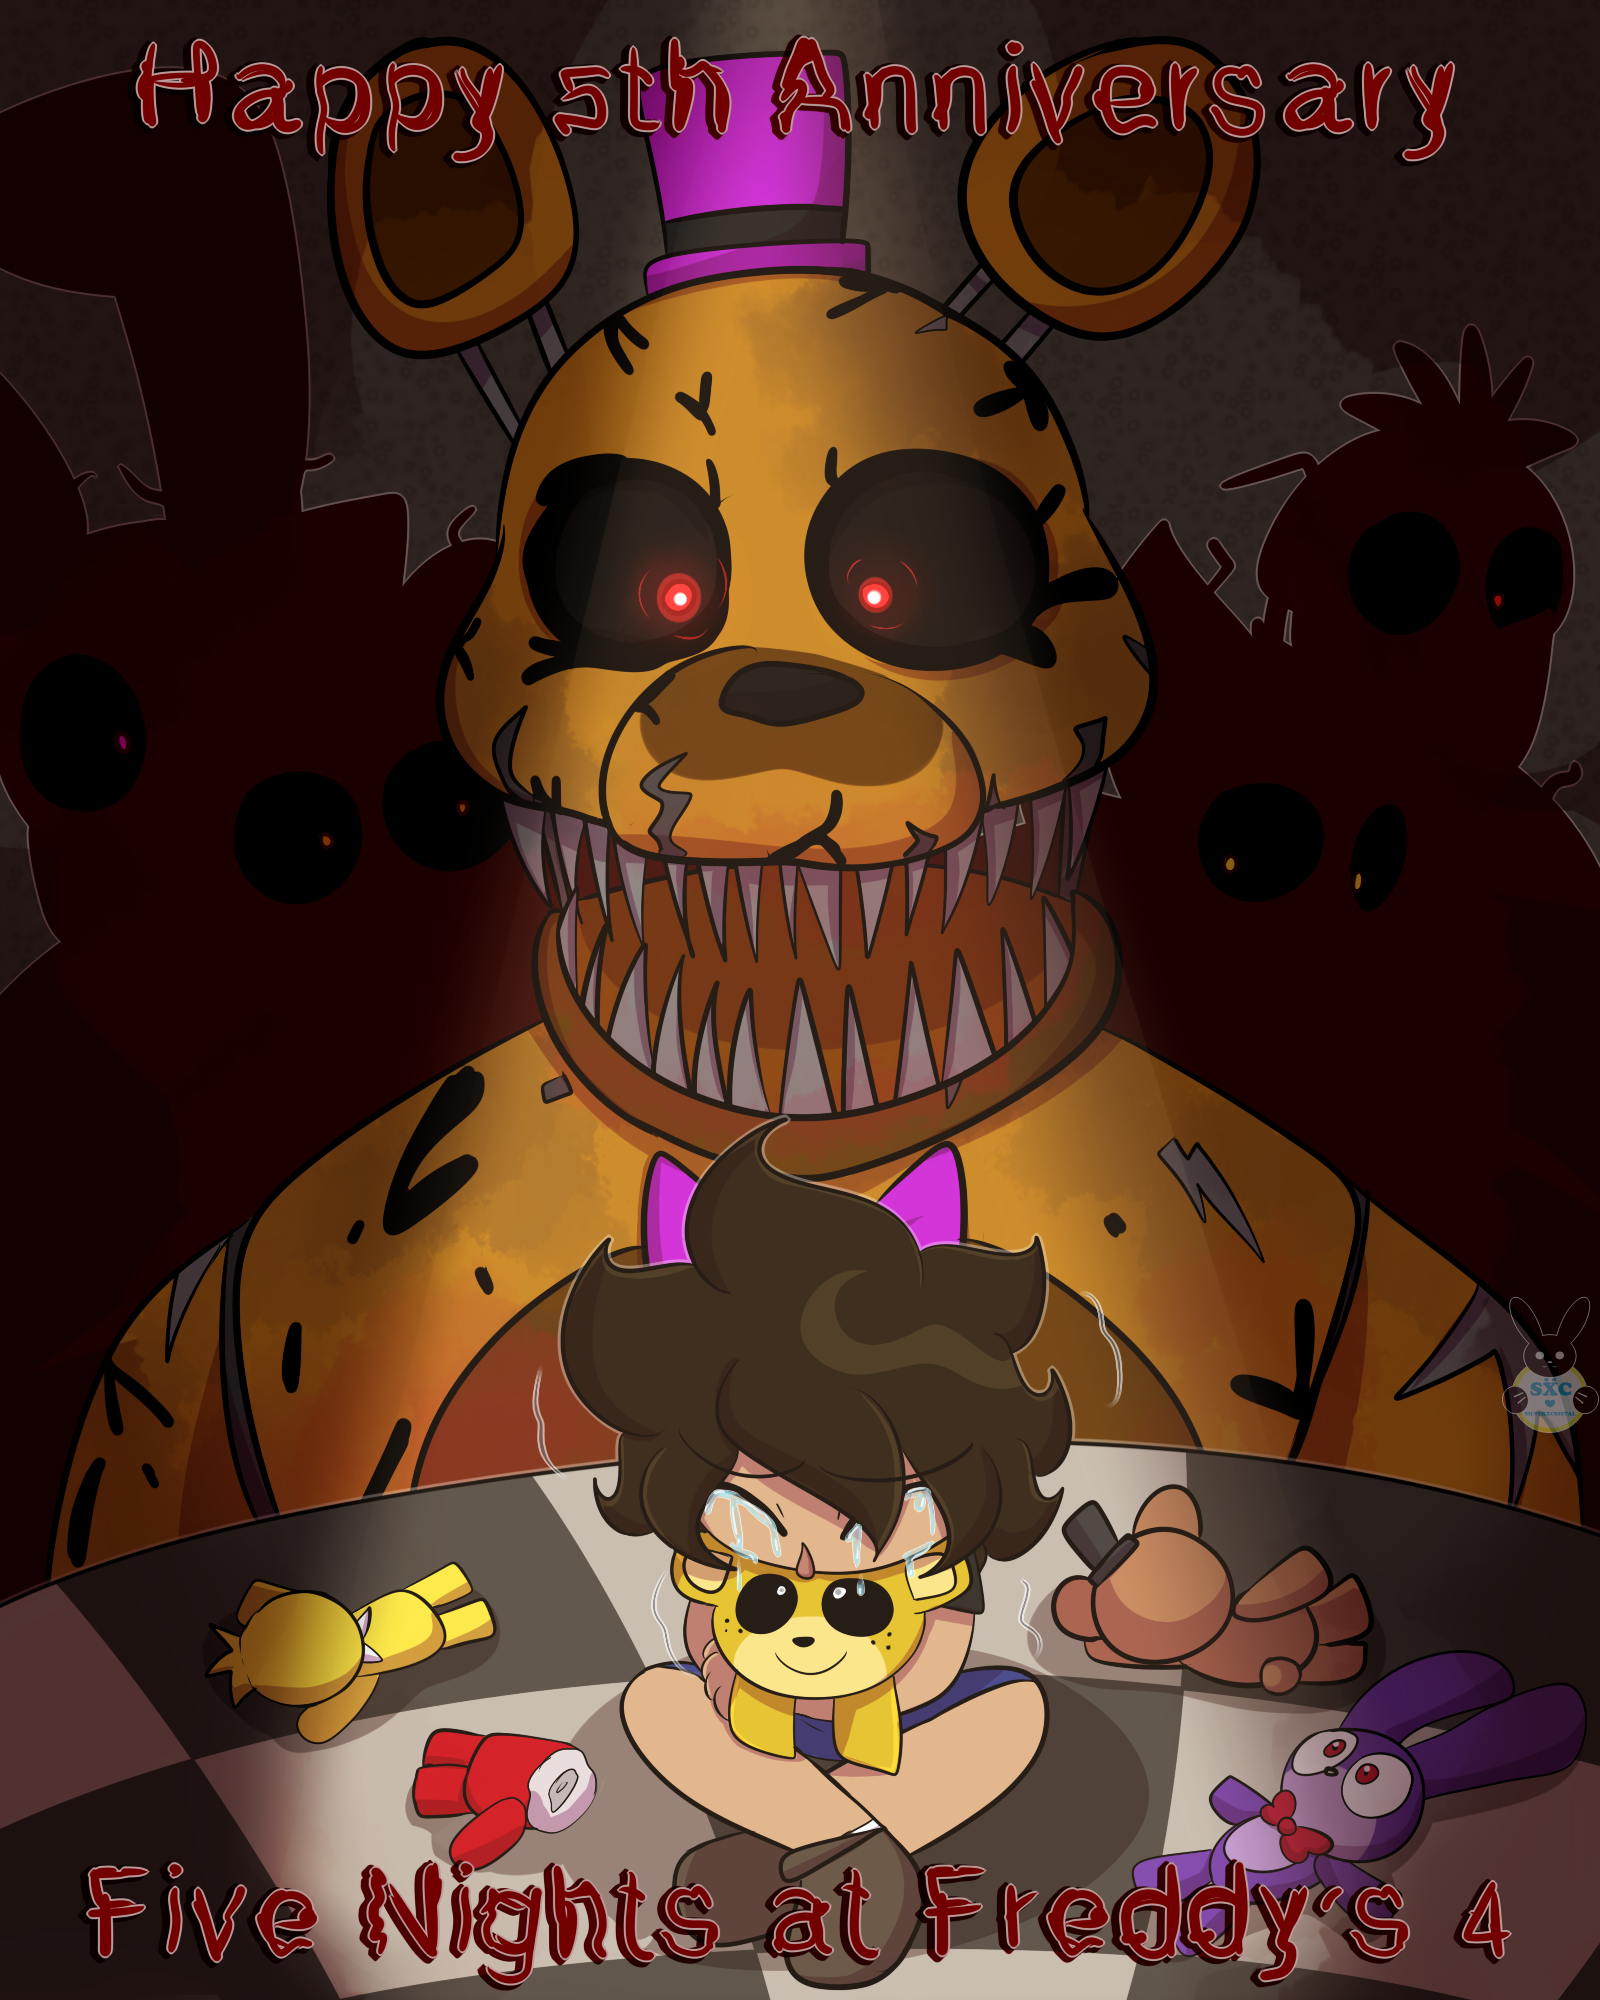 Shadow Ninja on X: Just some nice and cute fnaf 4 fanart of nightmare  fredbear being a big fluffy pillow for the kids he's defended from nightmare.  #FNAFfanart #FNAF  / X